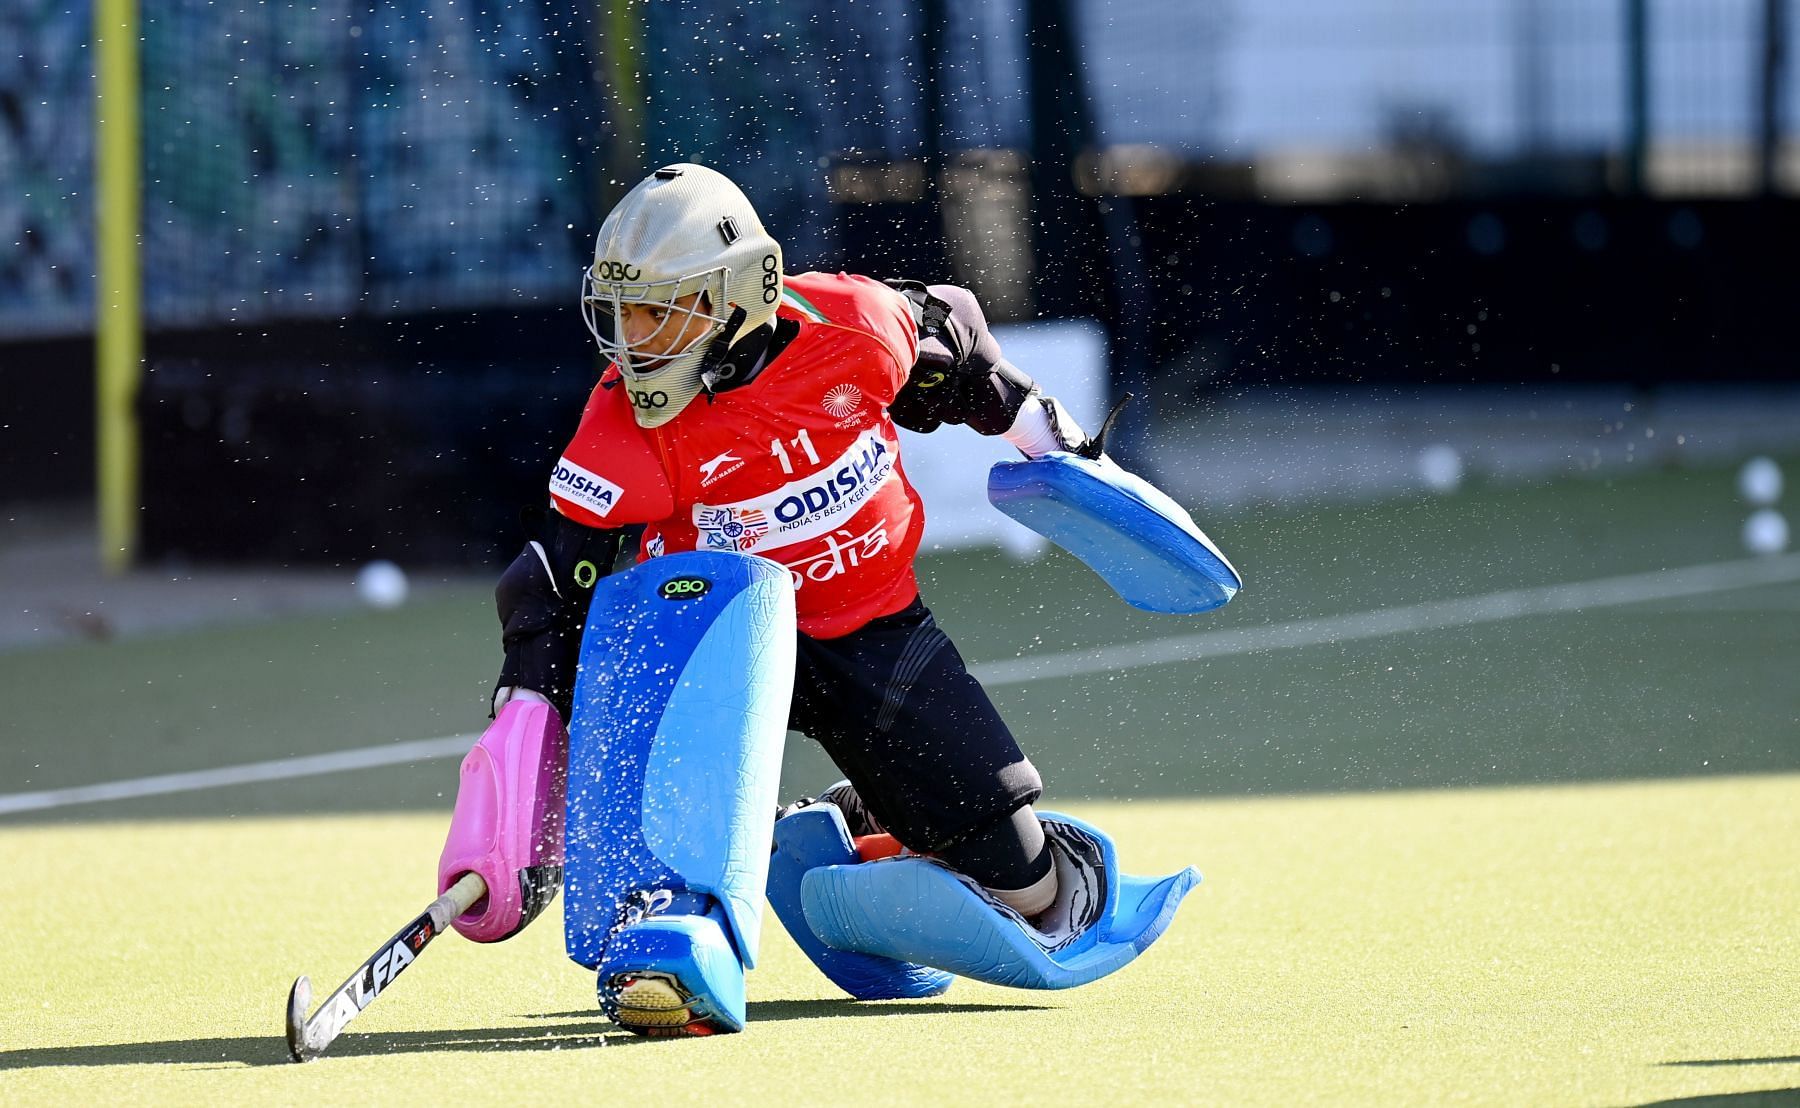 Savita Punia will lead the Indian team at the Asia Cup. (PC: Hockey India)